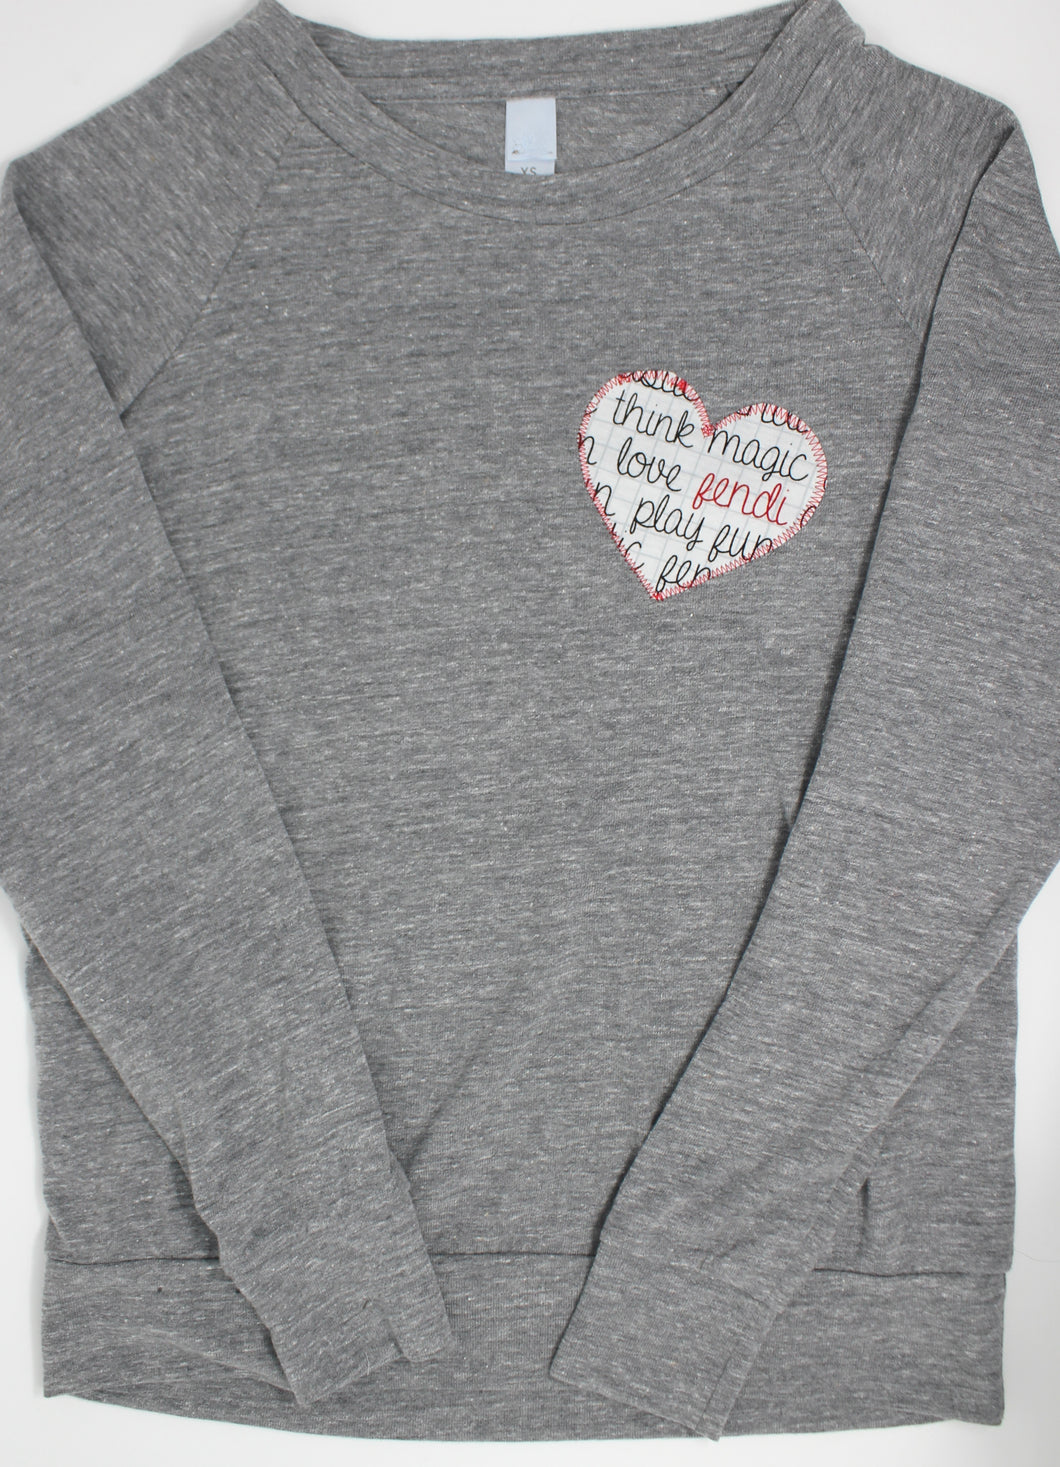 Words from the Heart Long-Sleeve Tee